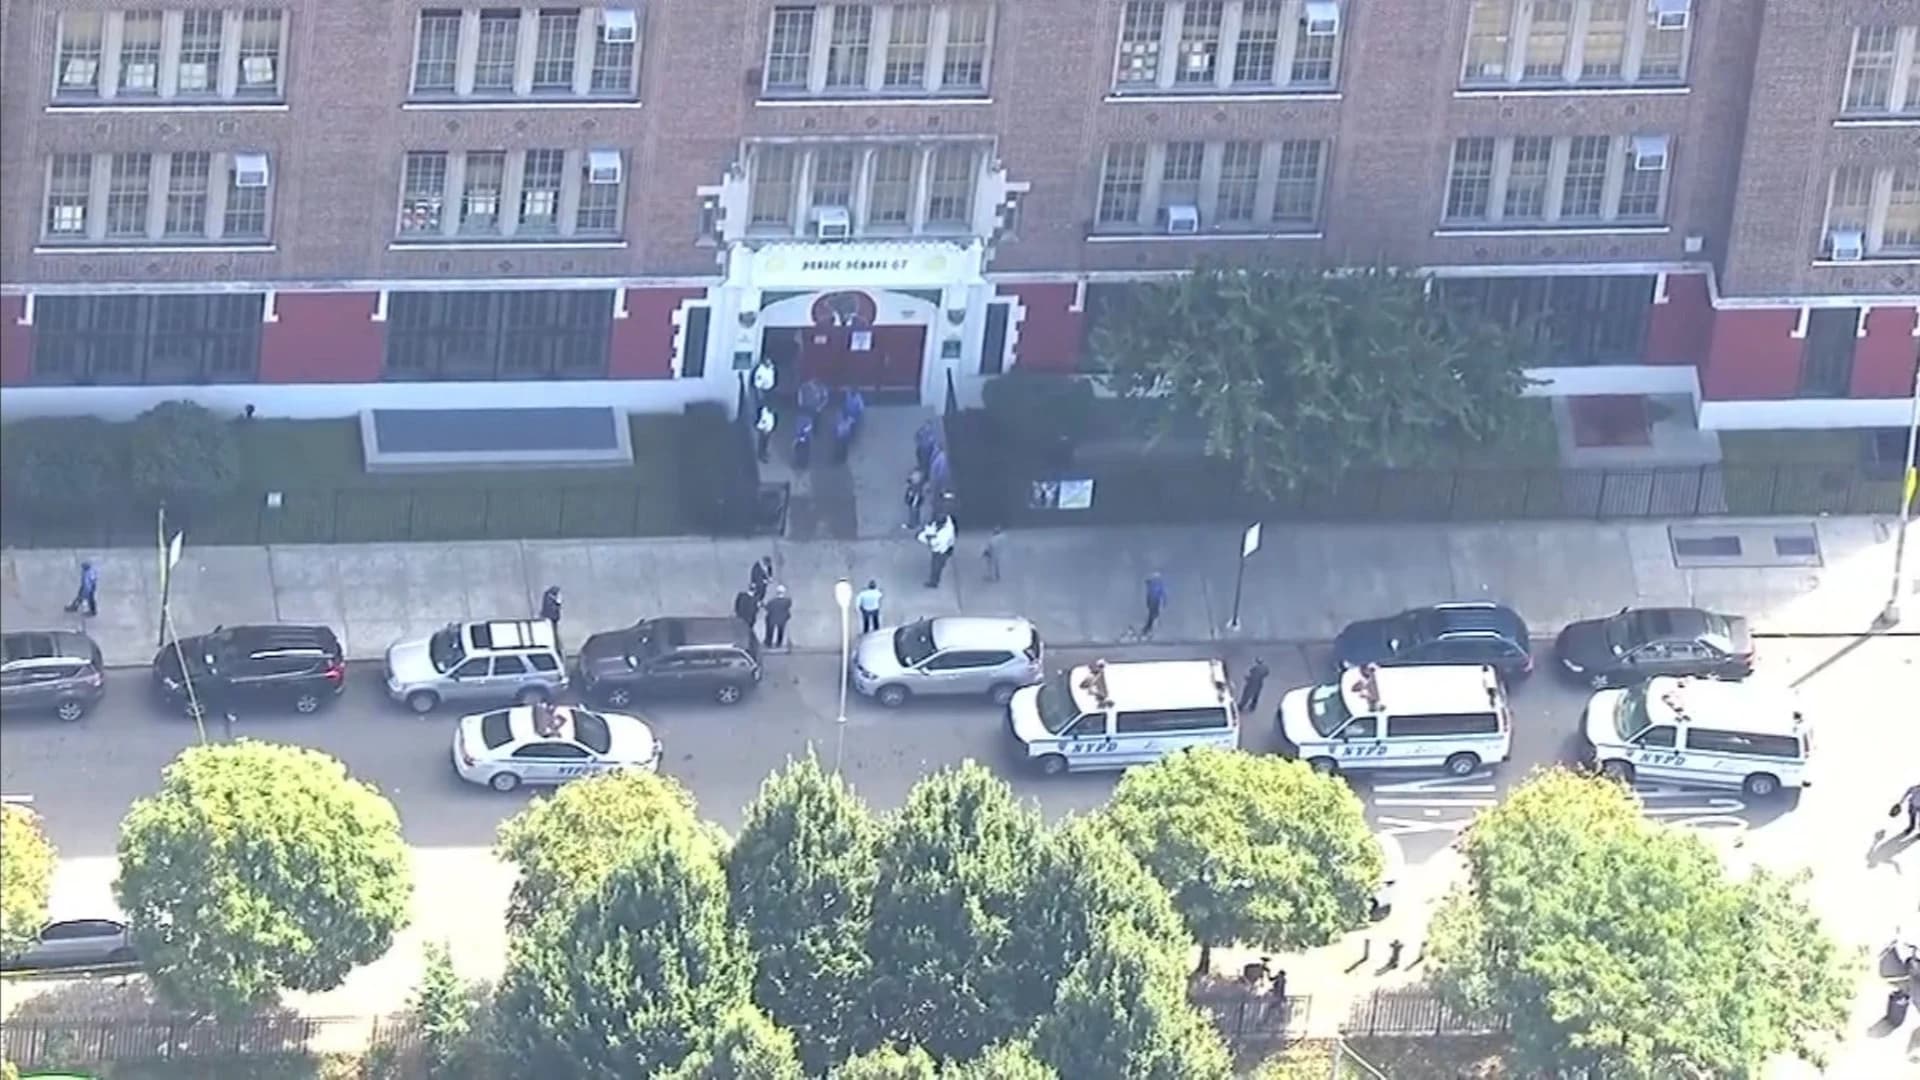 Police: Teen stabs students at NYC school, killing 15-year-old